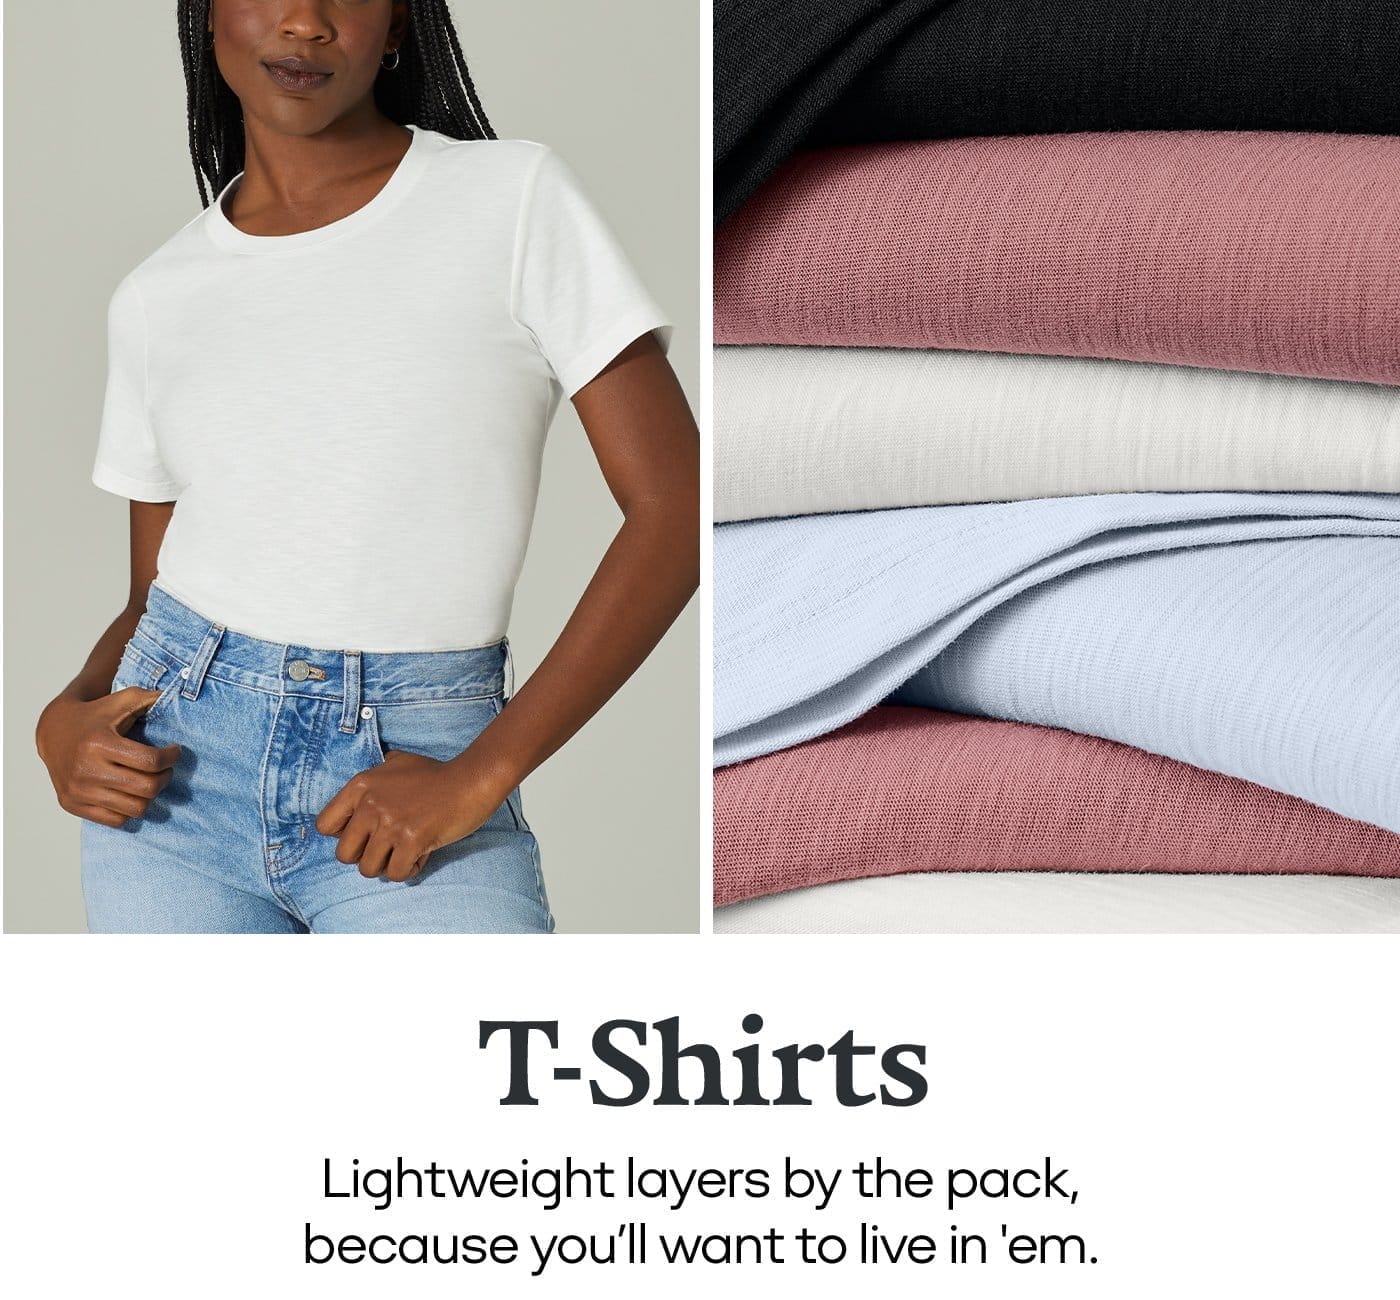 T-Shirts | Lightweight layers by the pack, because you’ll want to live in ‘em.